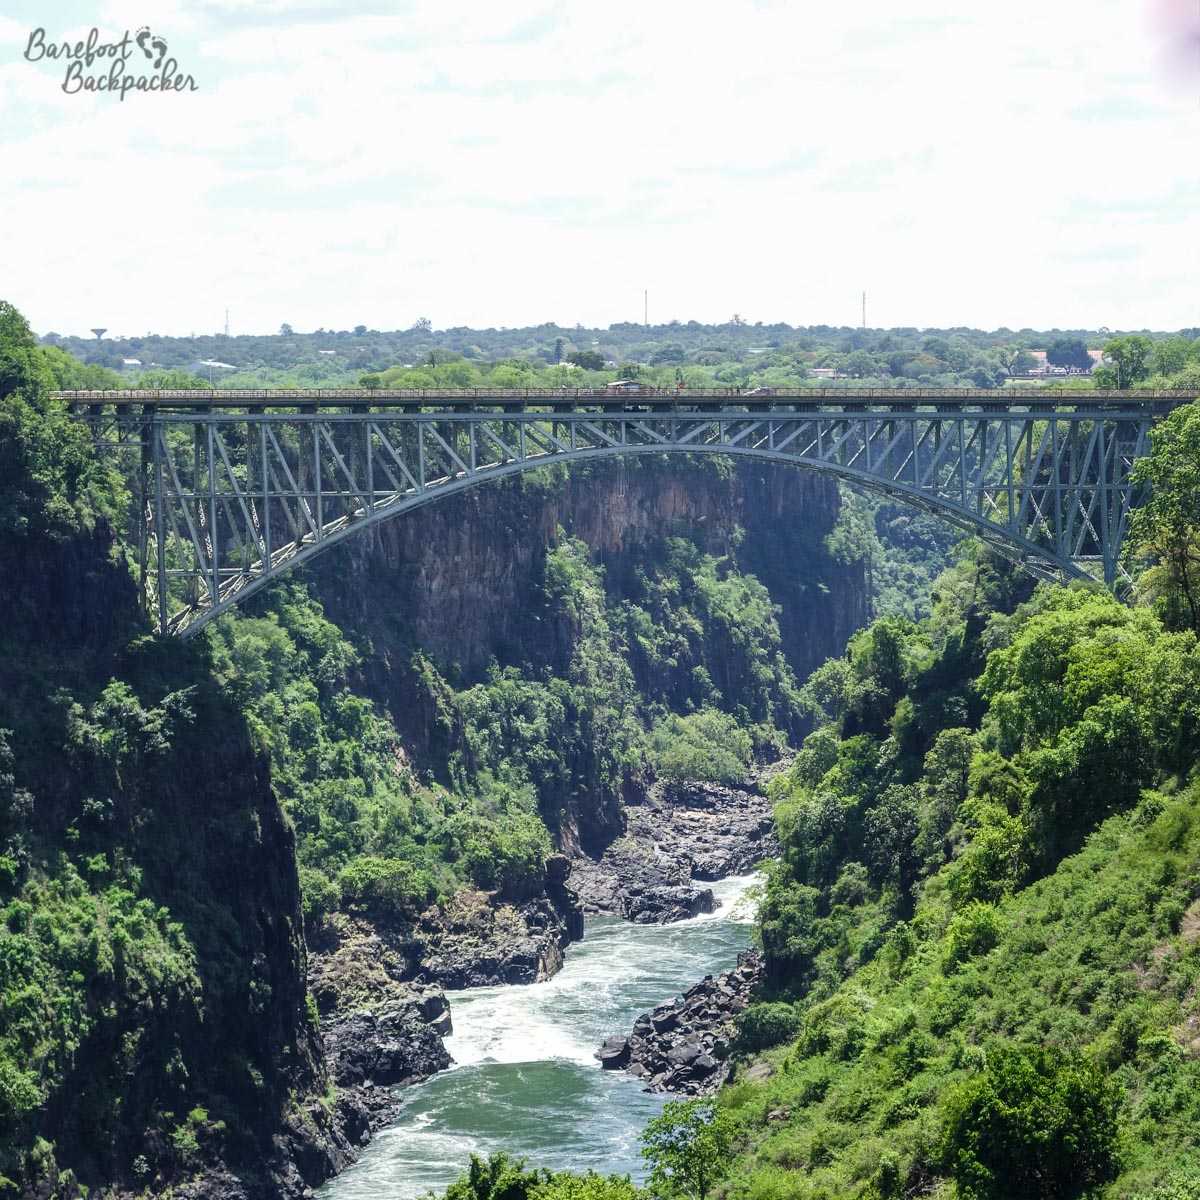 Victoria Falls Bridge – an arch of steel in the middle of a forest